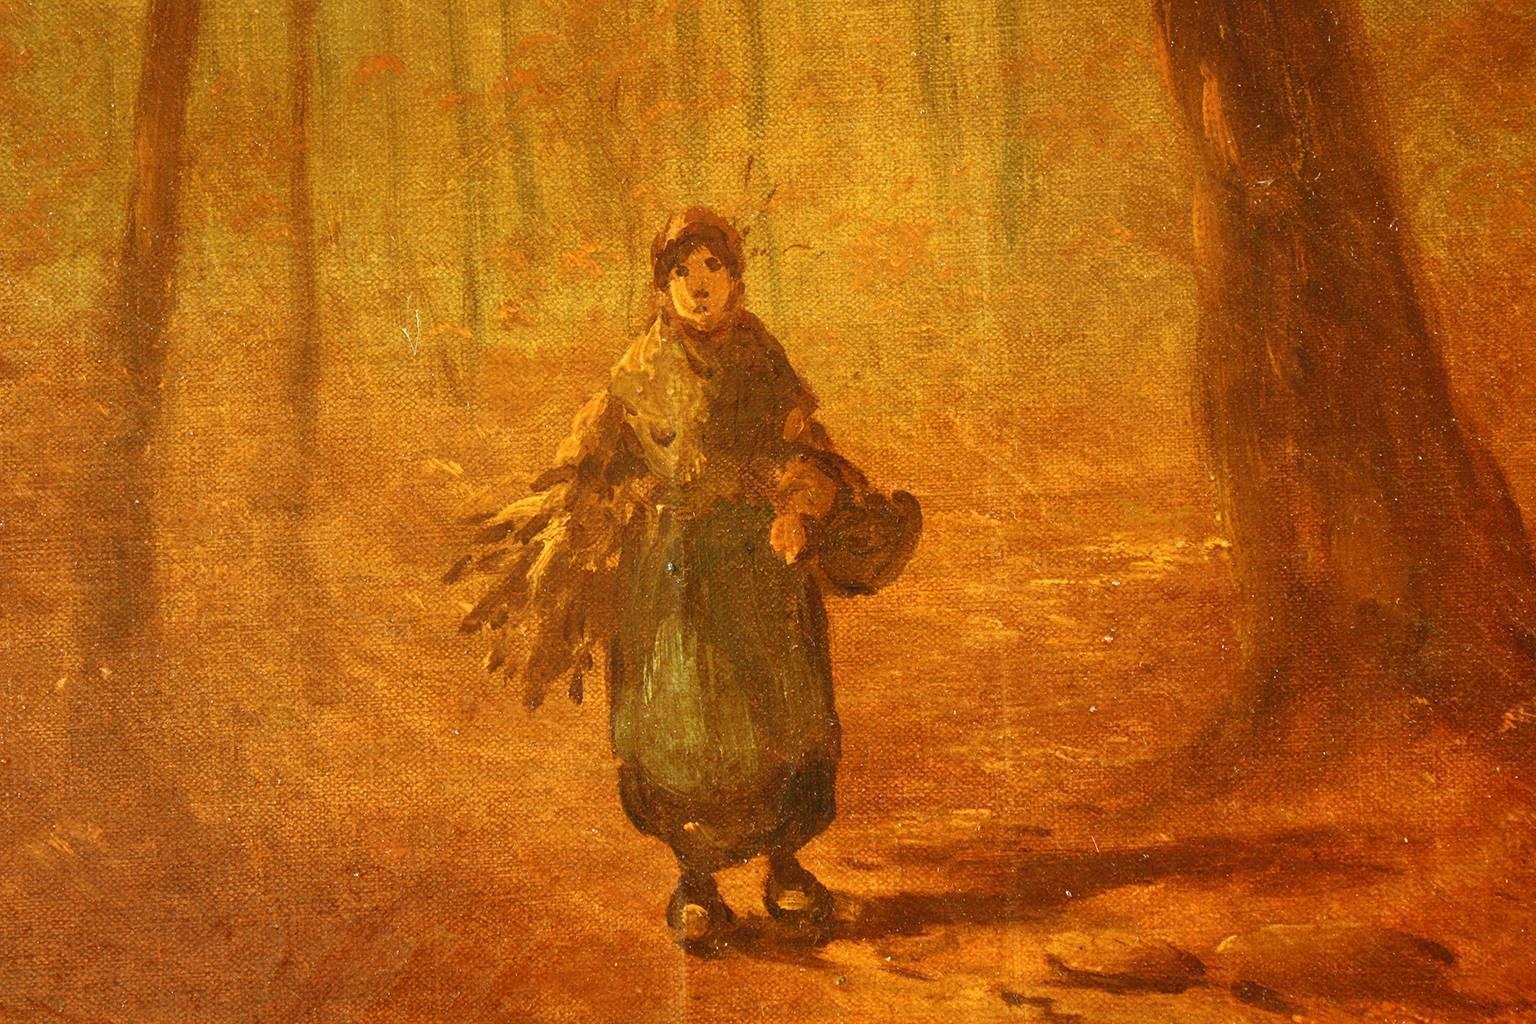 Woman Gathering Wood in the Fontainebleau forest with Indistinct Signature  - Brown Landscape Painting by Unknown